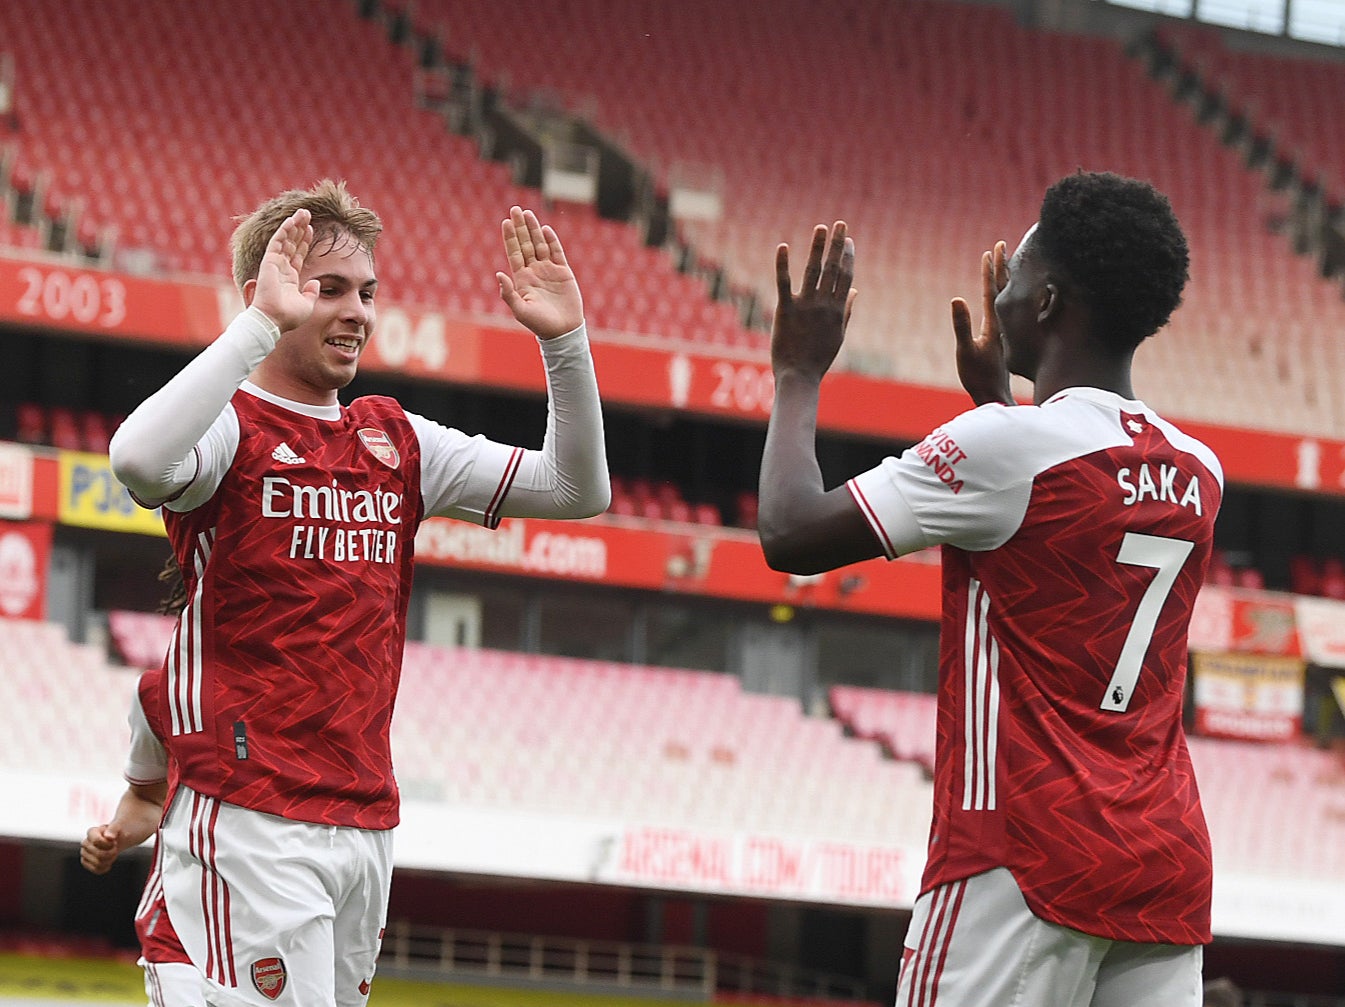 Emile Smith Rowe and Bukayo Saka have been standout players at Arsenal this season